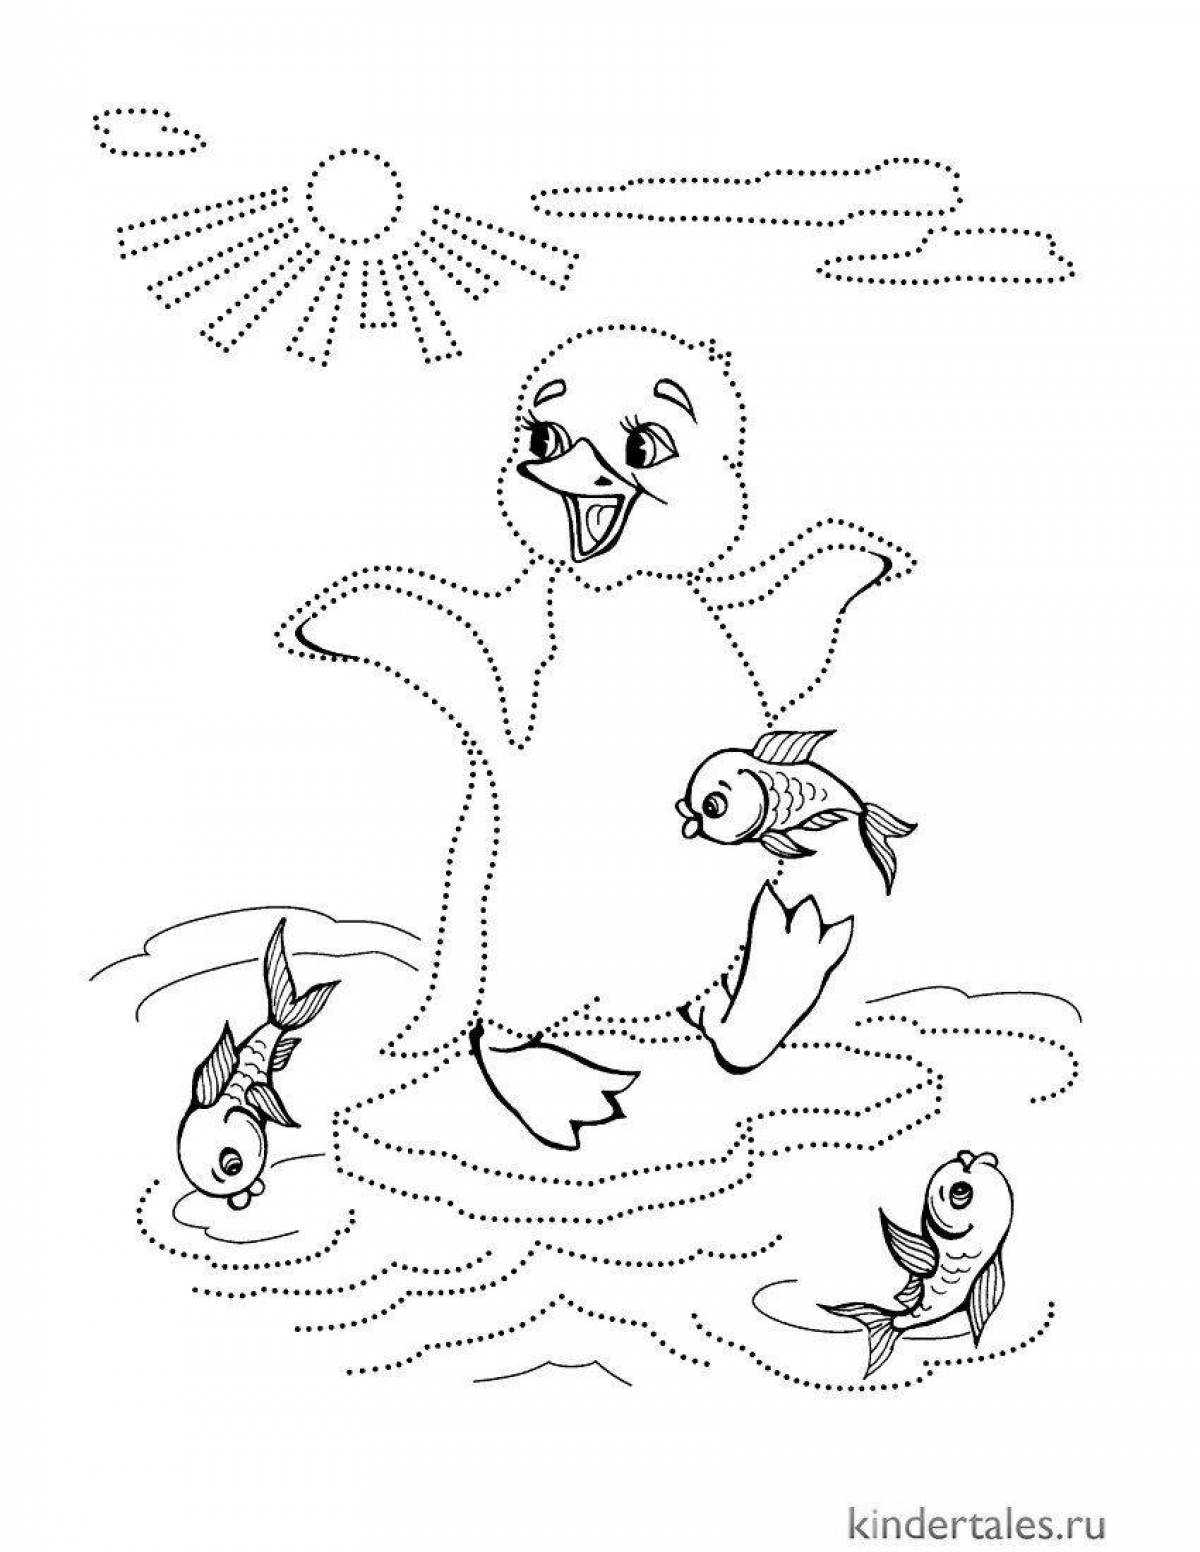 Shiny penguin coloring pages